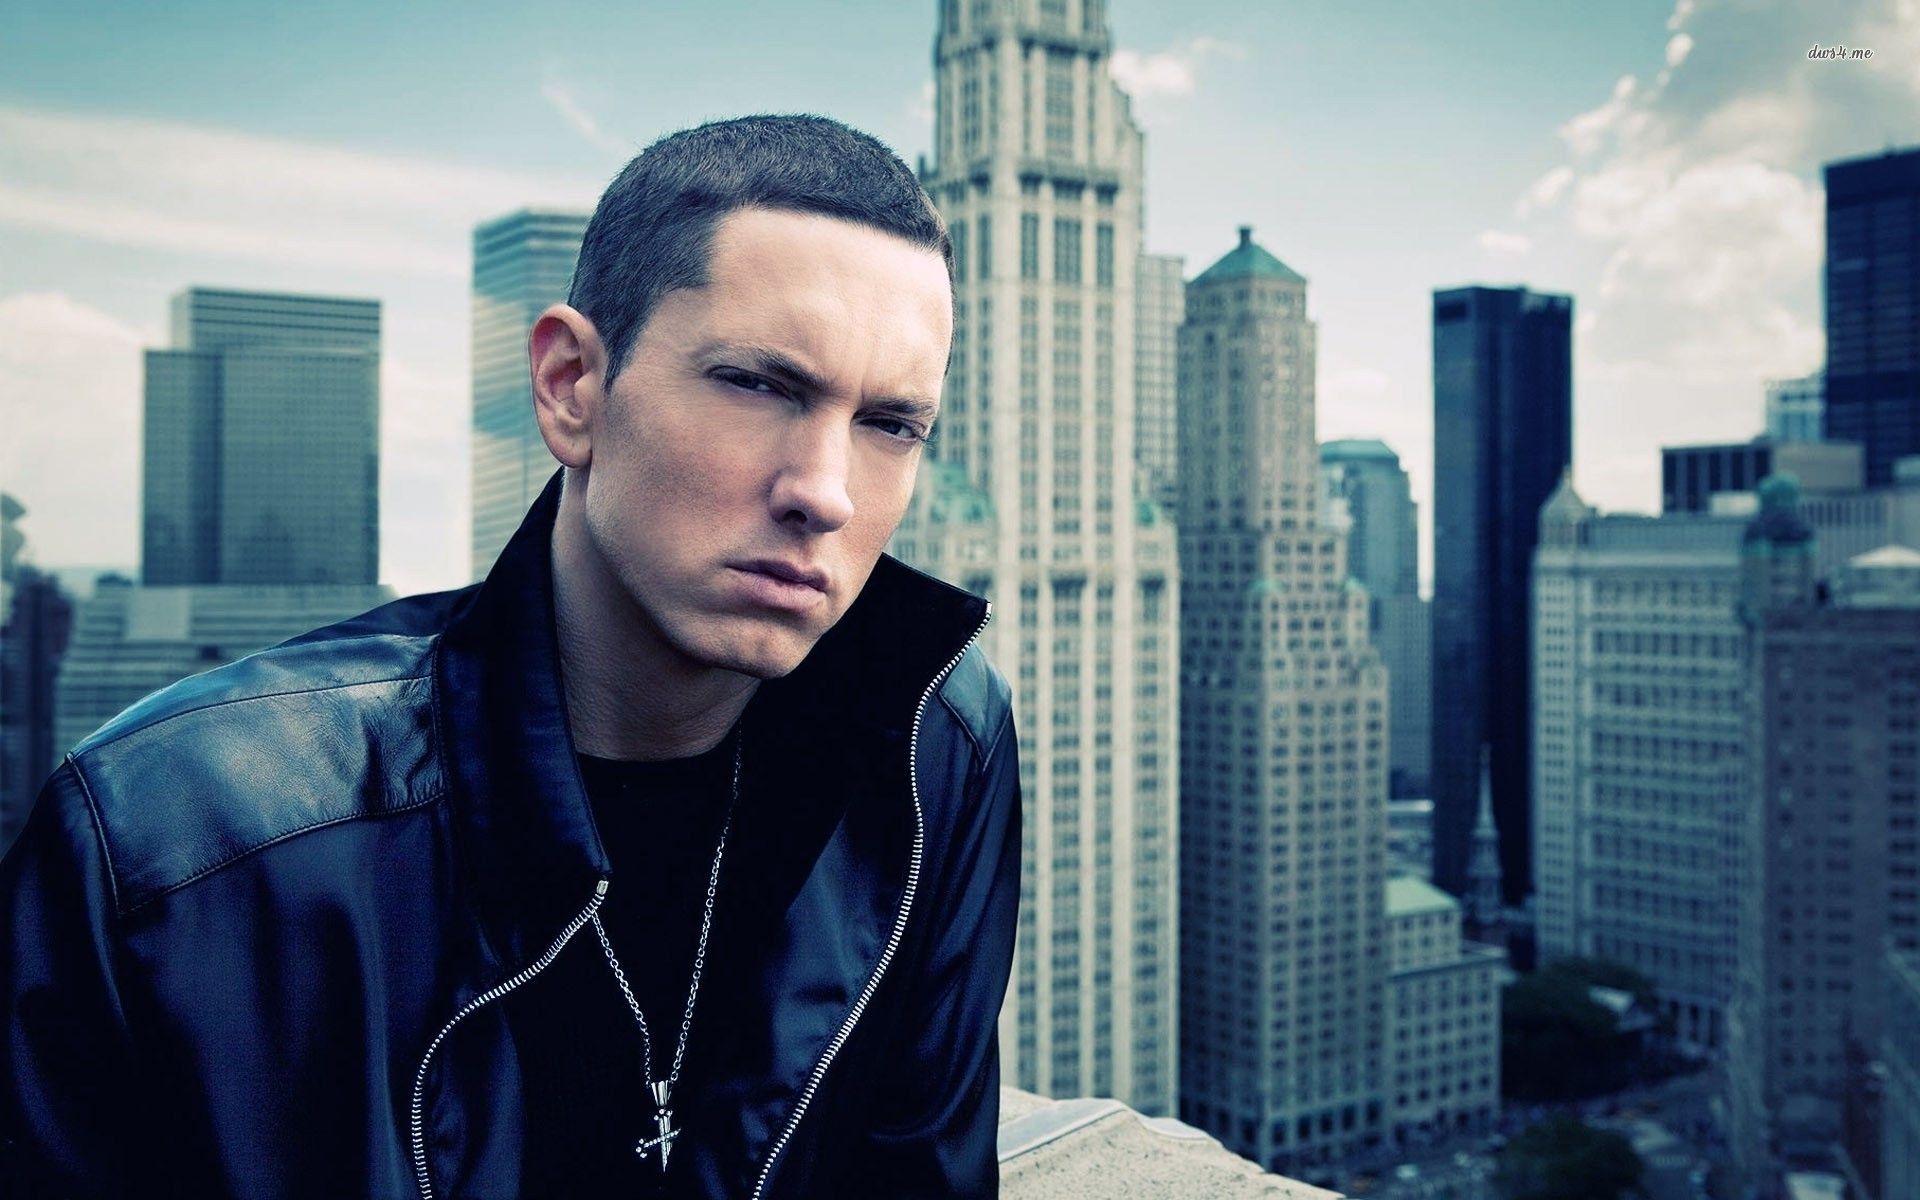 eminem wallpaper,cool,city,white collar worker,photography,jacket